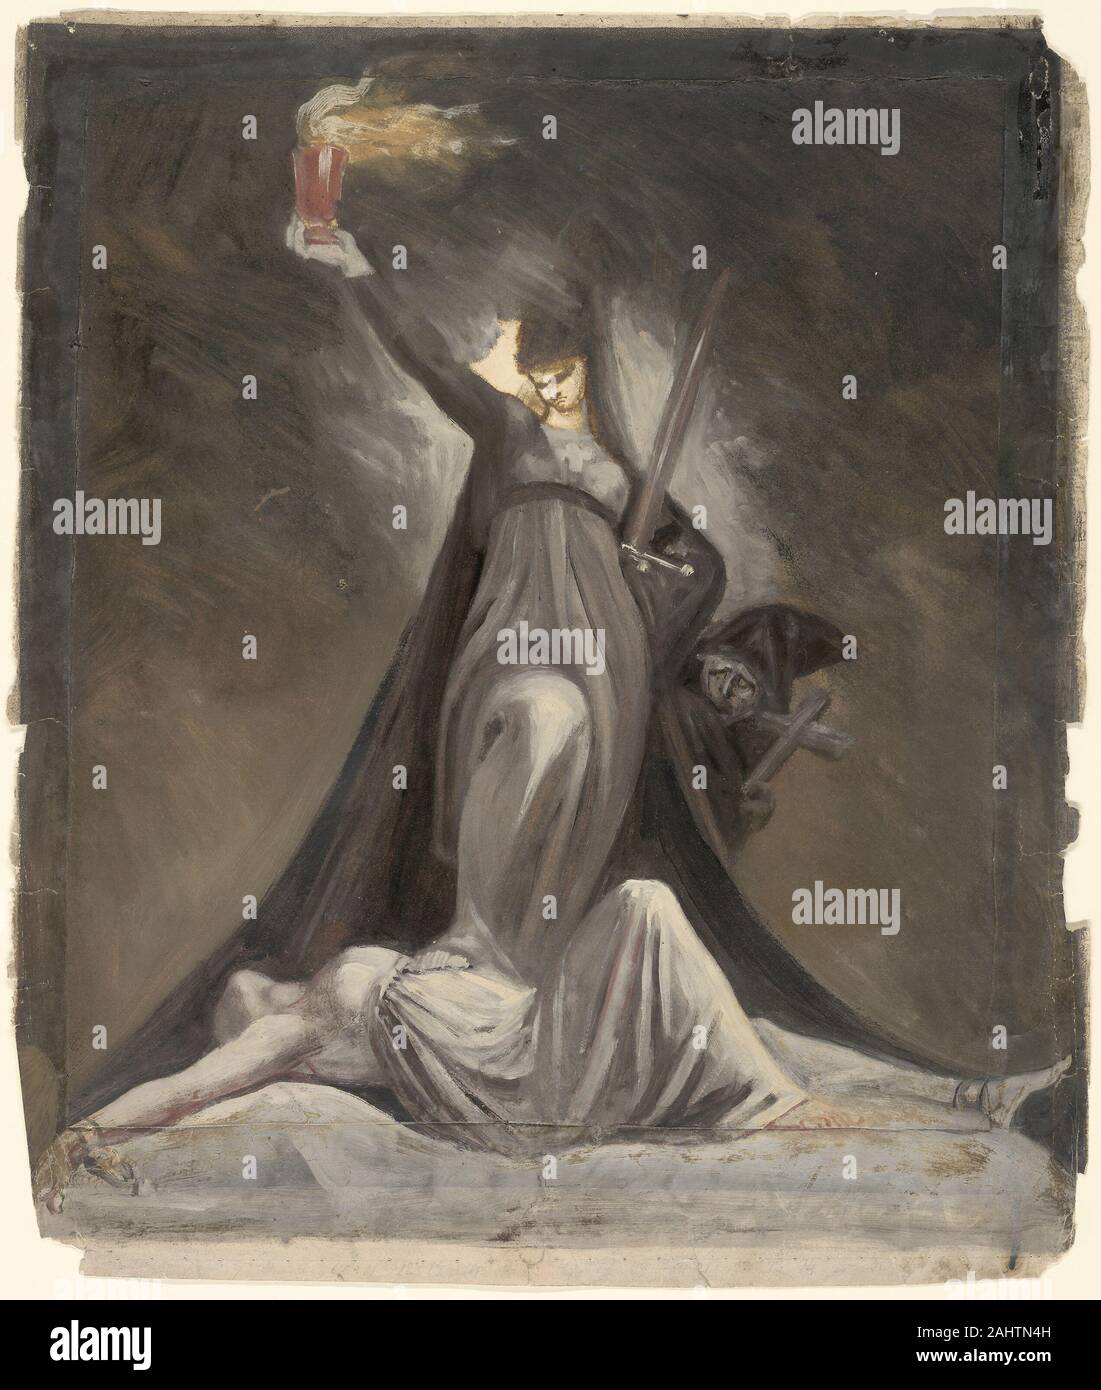 Henry Fuseli. Study for Inquisition, Illustration to Columbiad. 1805–1809. England. Oil paint, over touches of graphite, on cream wove paper, laid down on stipple etching, etching, and aquatint in black on cream wove paper The Spanish Inquisition (symbolizing religious intolerance) is personified as a sinister-looking woman carrying a sword and holding a flaming vessel. She stands triumphantly atop the prone body of Truth. Peering out from behind her is a Dominican friar, an instrument of her authority.Fuseli’s painted sketch (a study for an unpublished engraving) illustrates lines from the ea Stock Photo